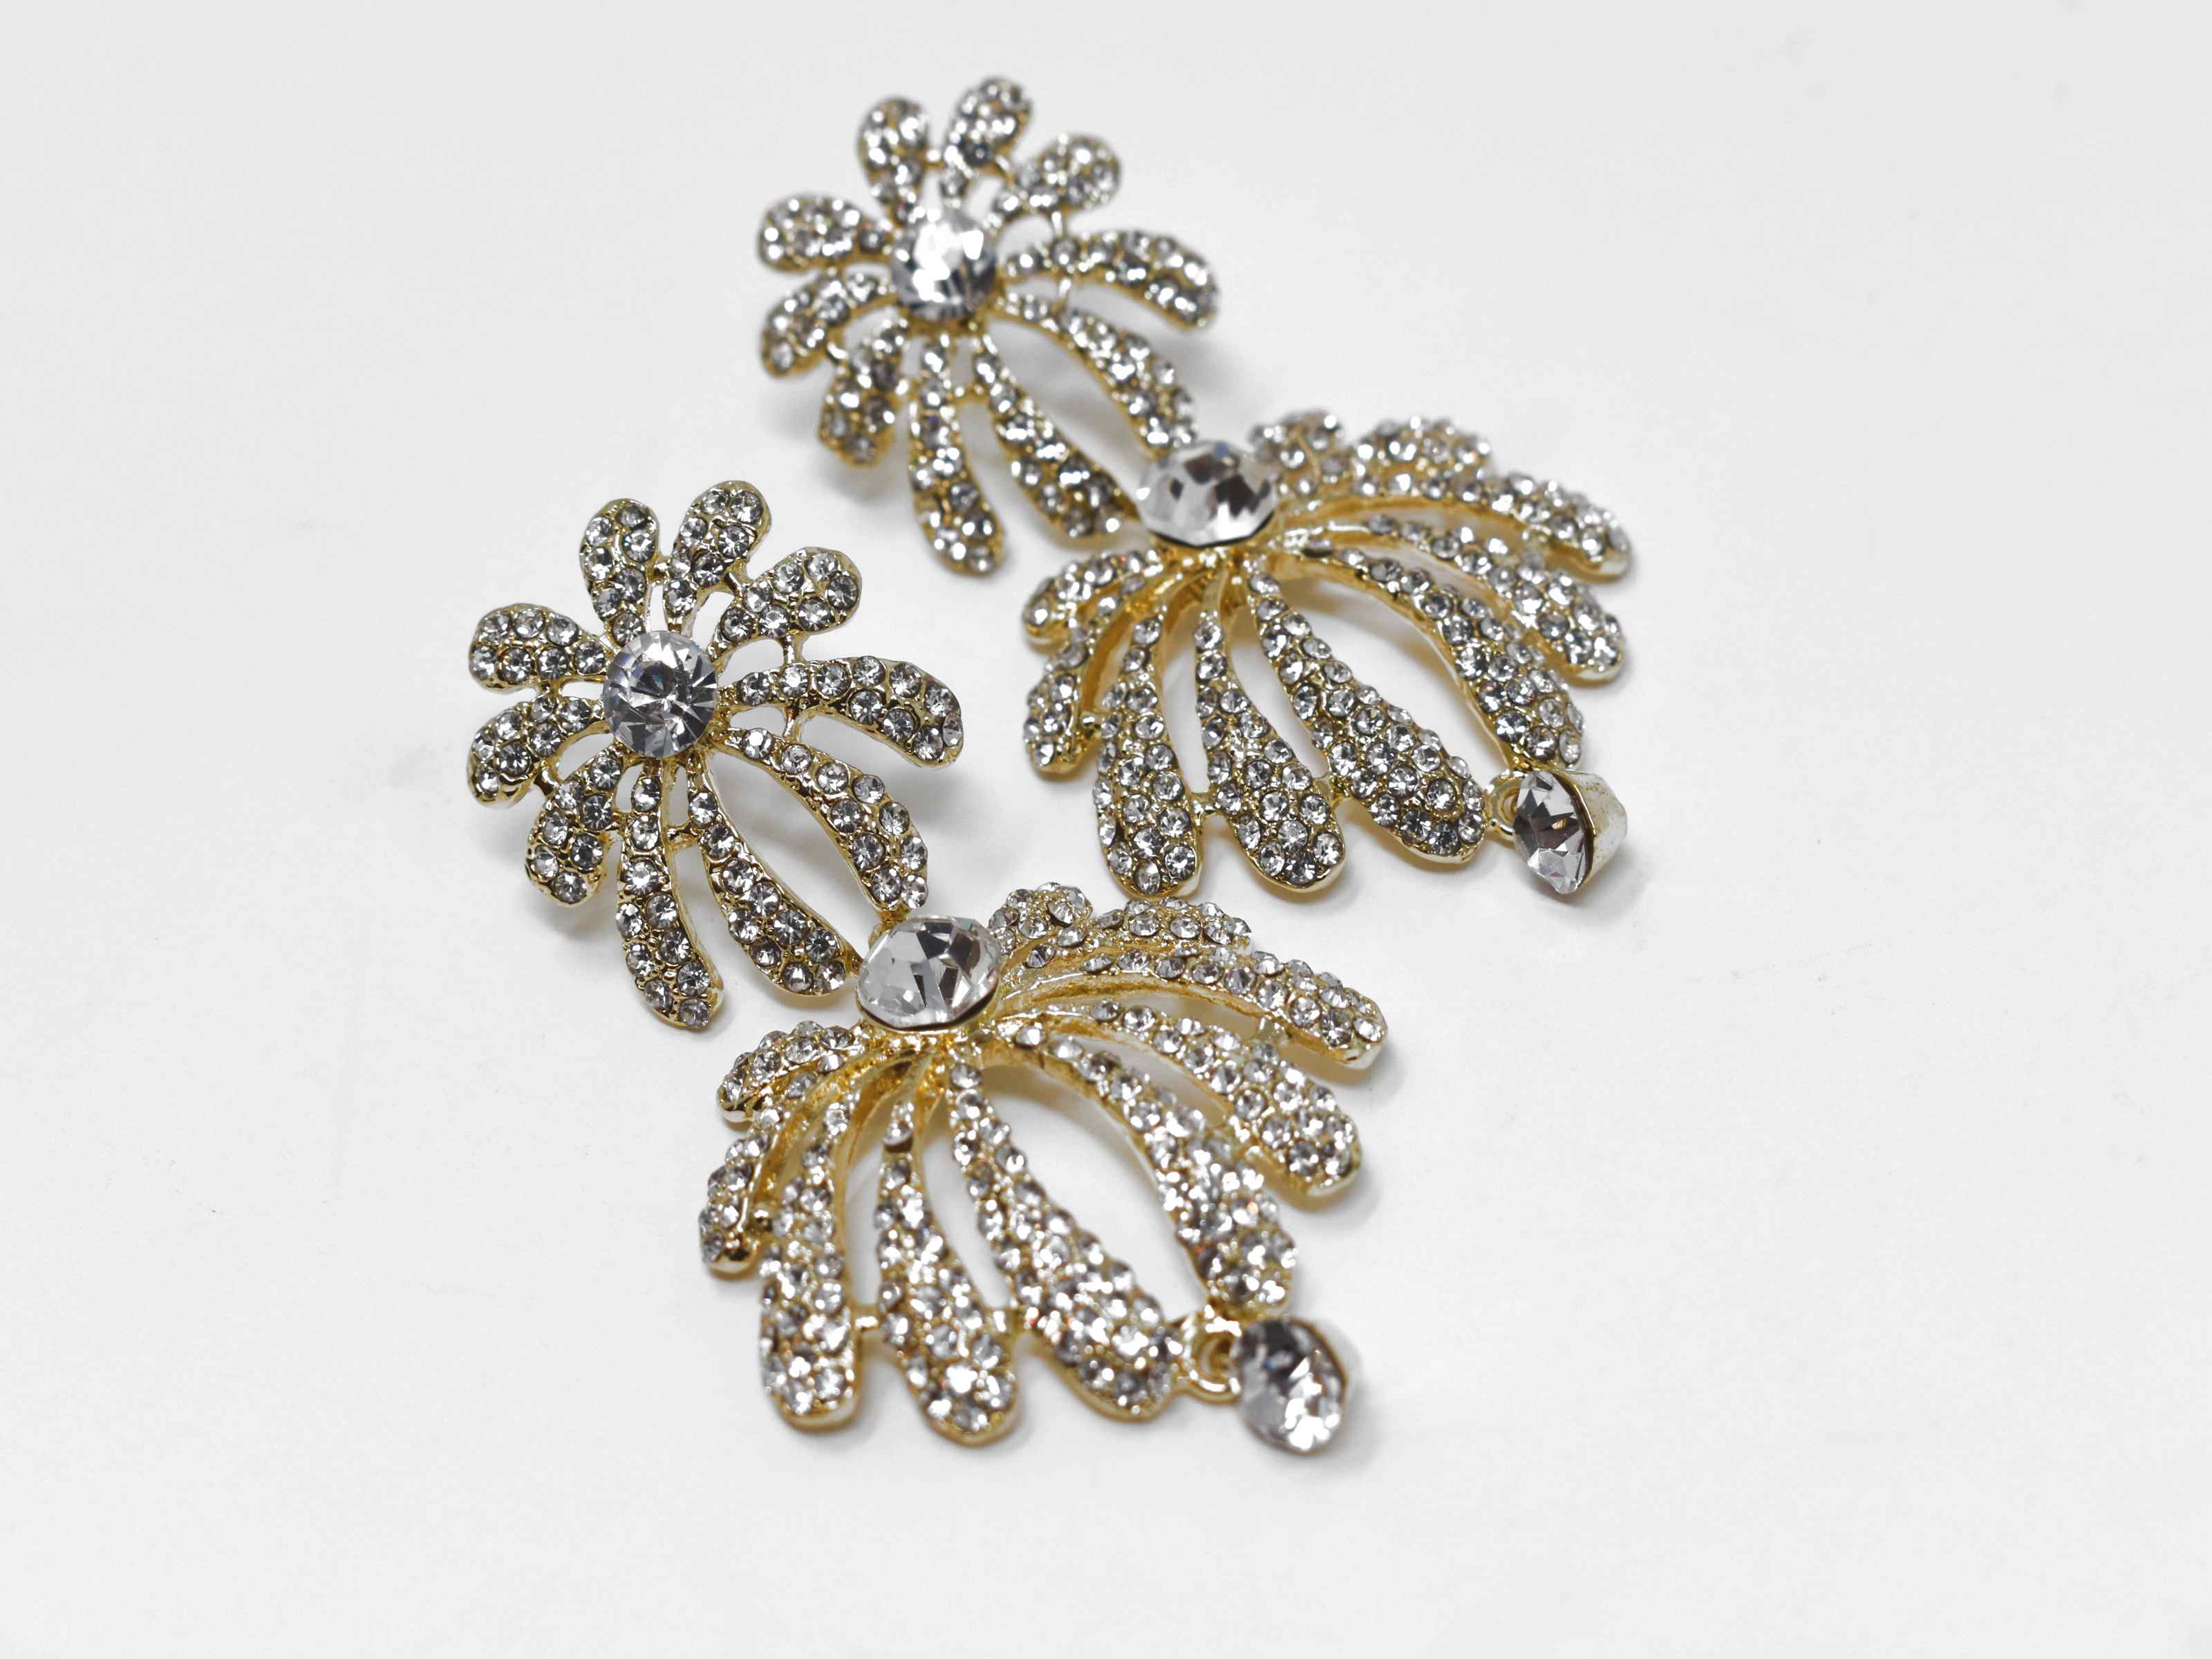 A radiant burst of sparkle is how you would describe our helenium gold earrings. These are a two tier floral burst formal drop earring with clear stones. They are 2 1/2 inches in length with a pushback clasp.